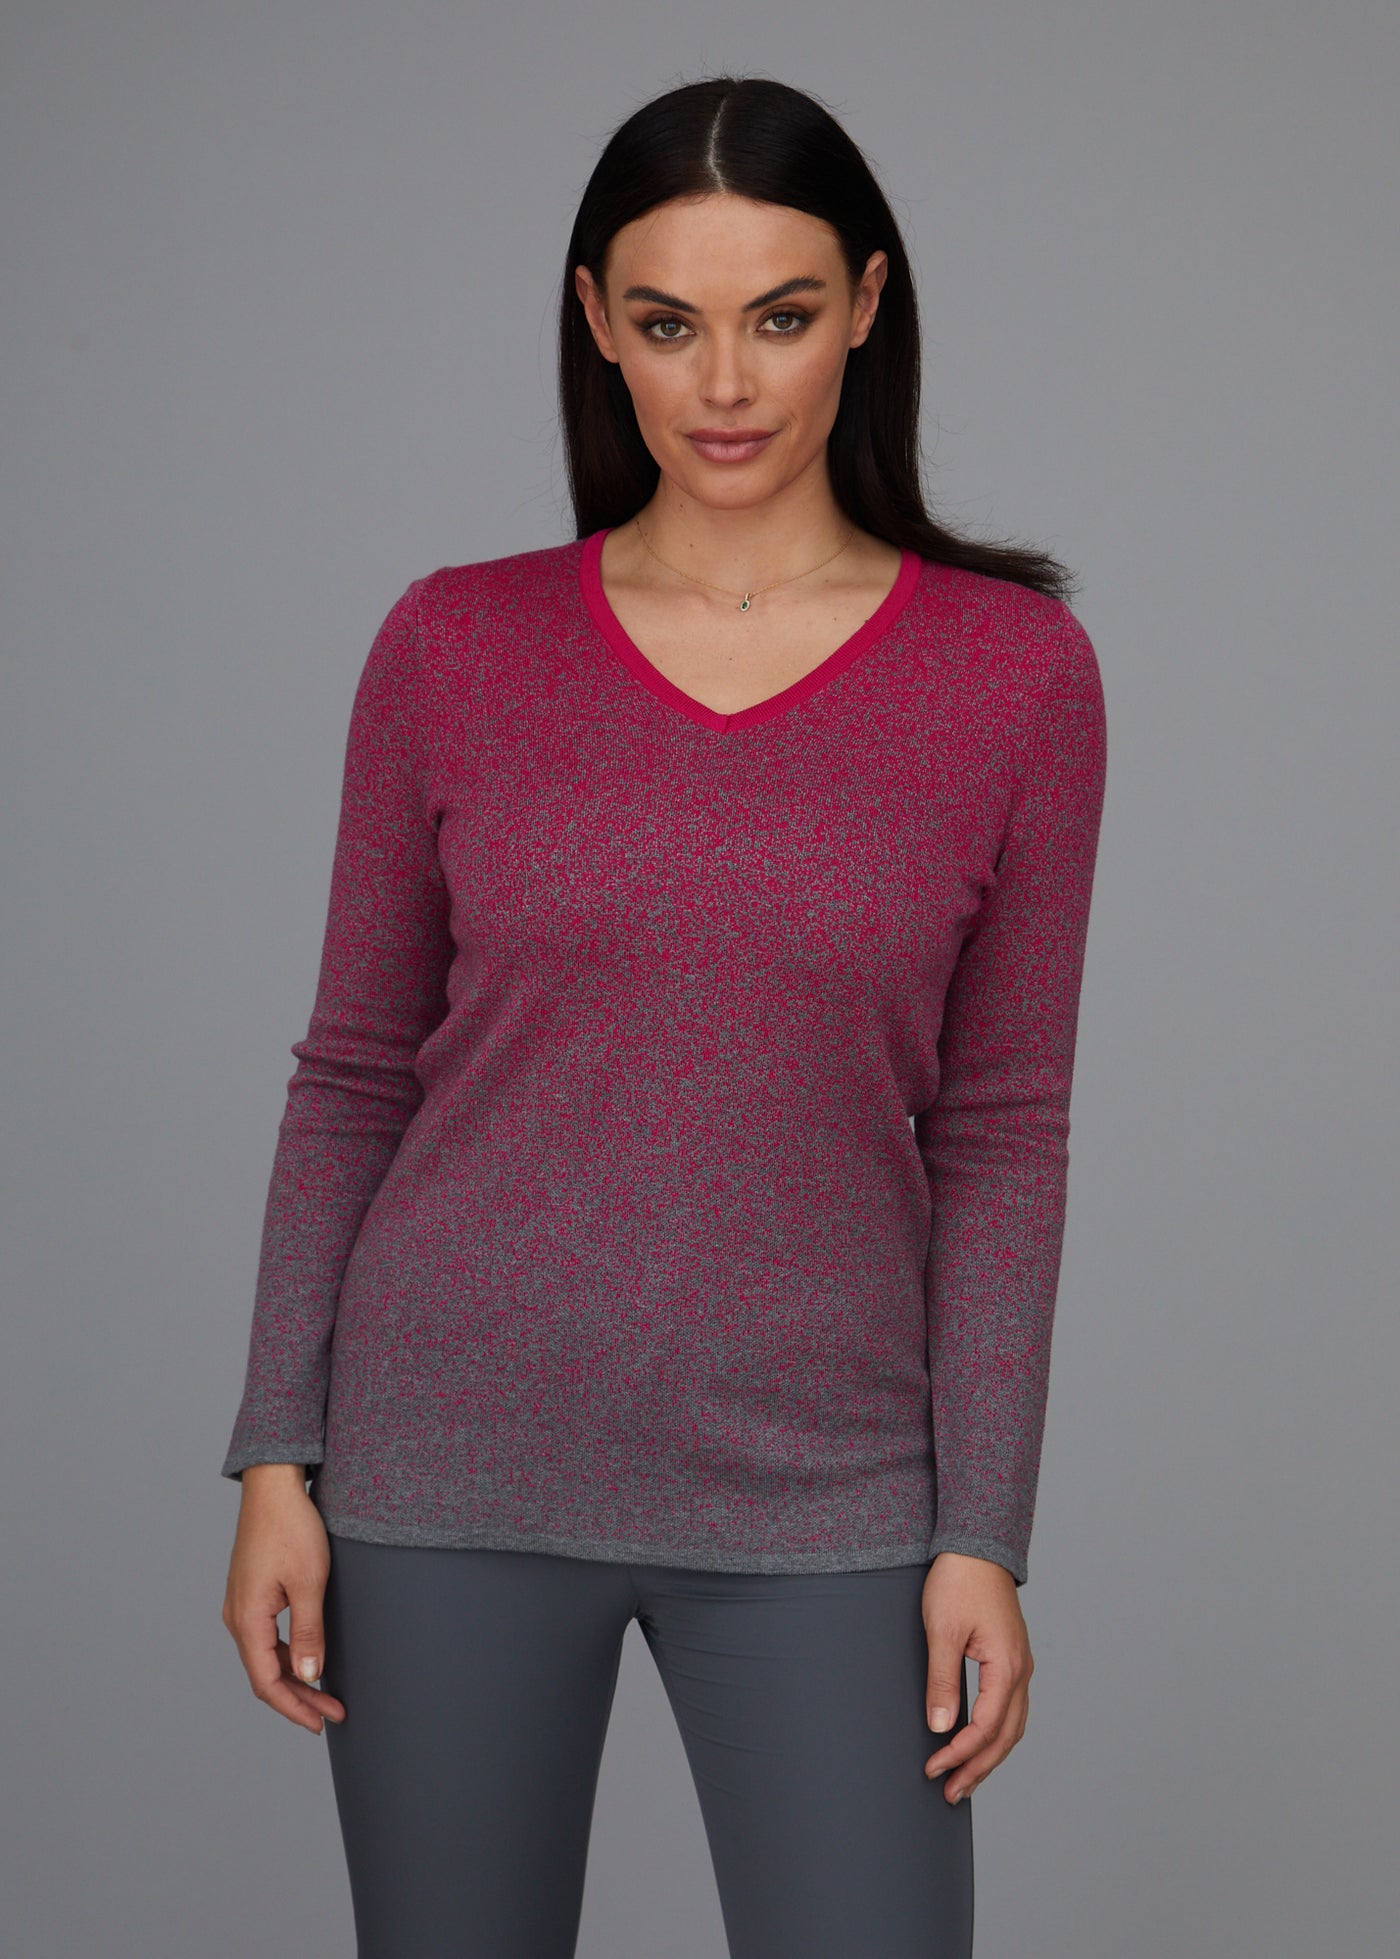 Pixelated V-Neck Sweater: FINAL SALE